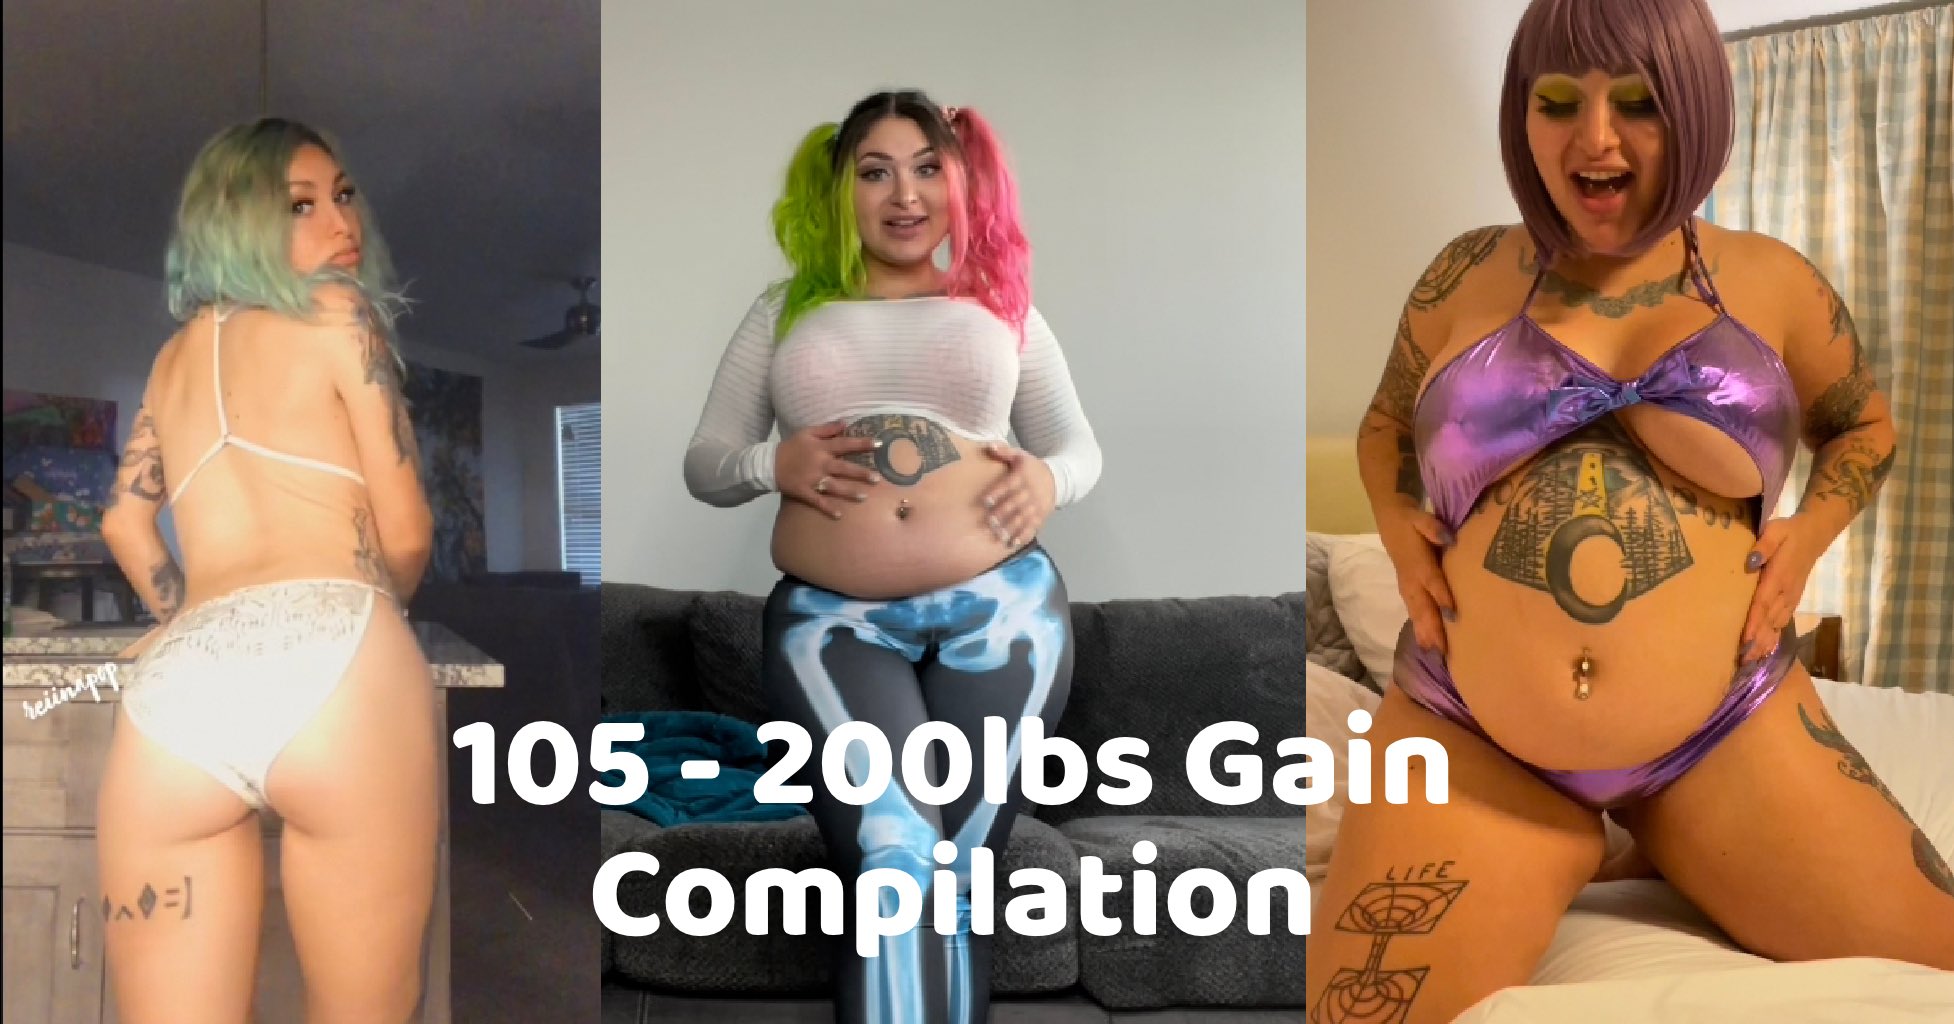 reiinapop 🍩 too cool, too deadly on X: i made a 33 min long weight gain  compilation video! it's pending approval on curvage - had to split it in 2  parts. everyone